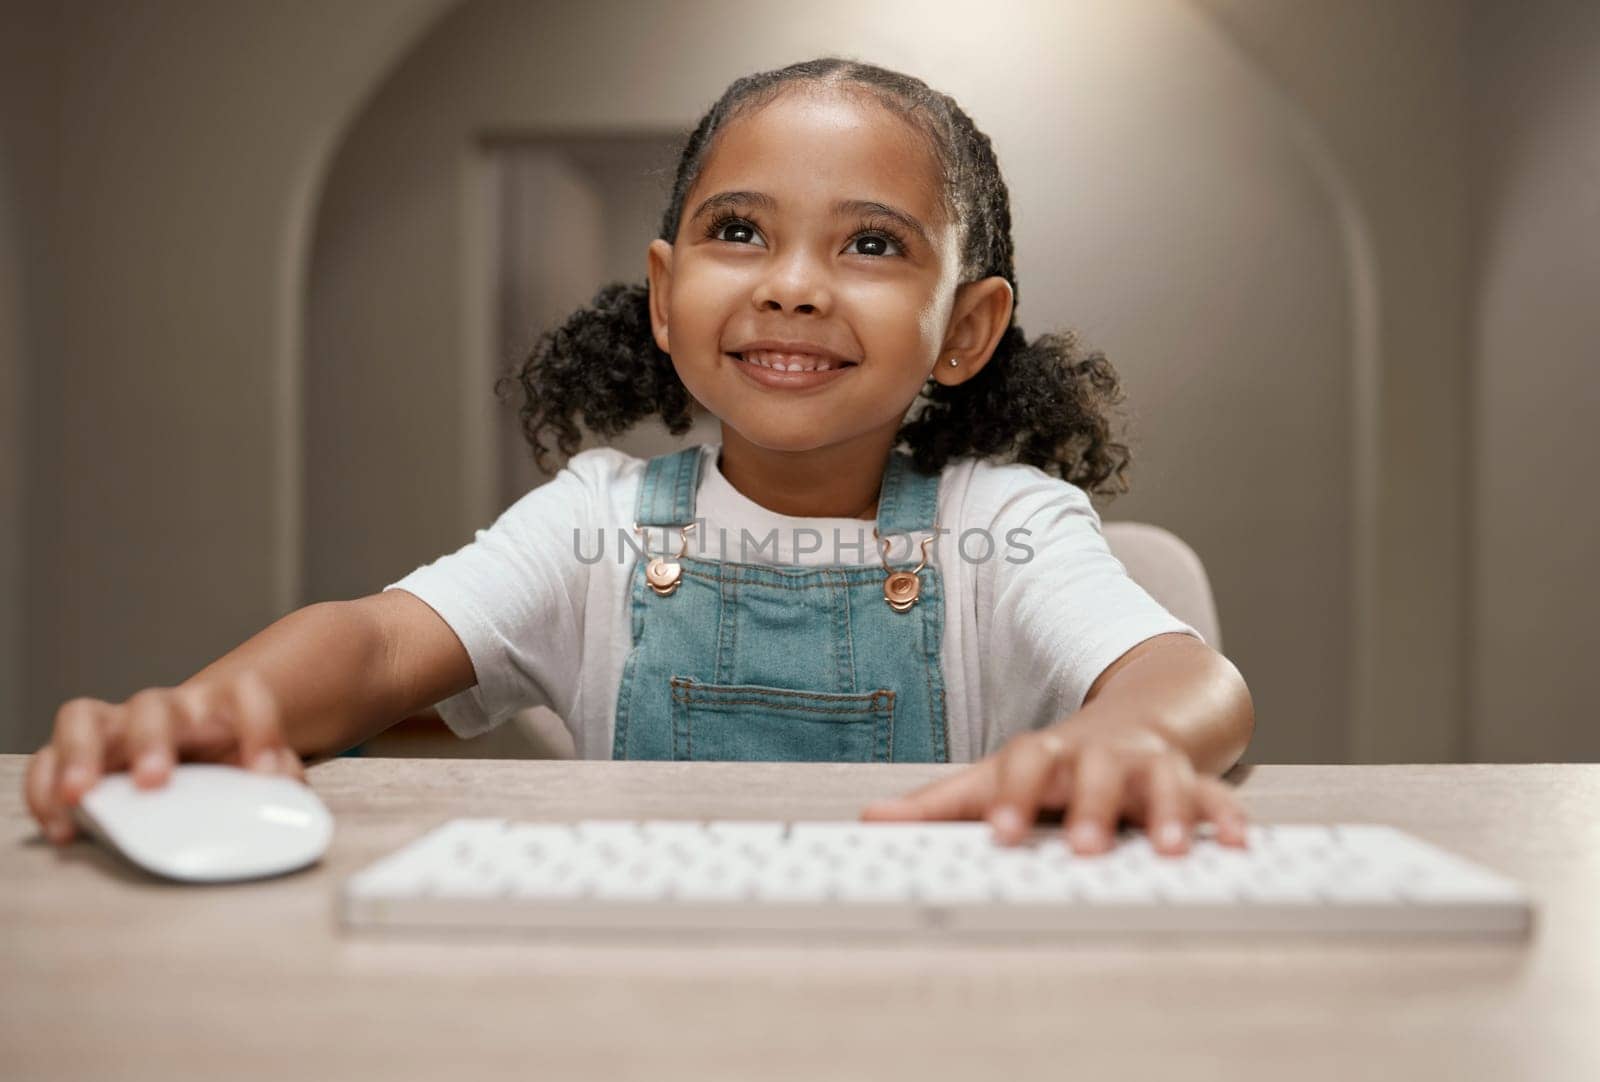 Online education, elearning and girl on computer with a smile ready for digital knowledge. Web learning, kindergarten development and kid on online course training and learning on the internet by YuriArcurs